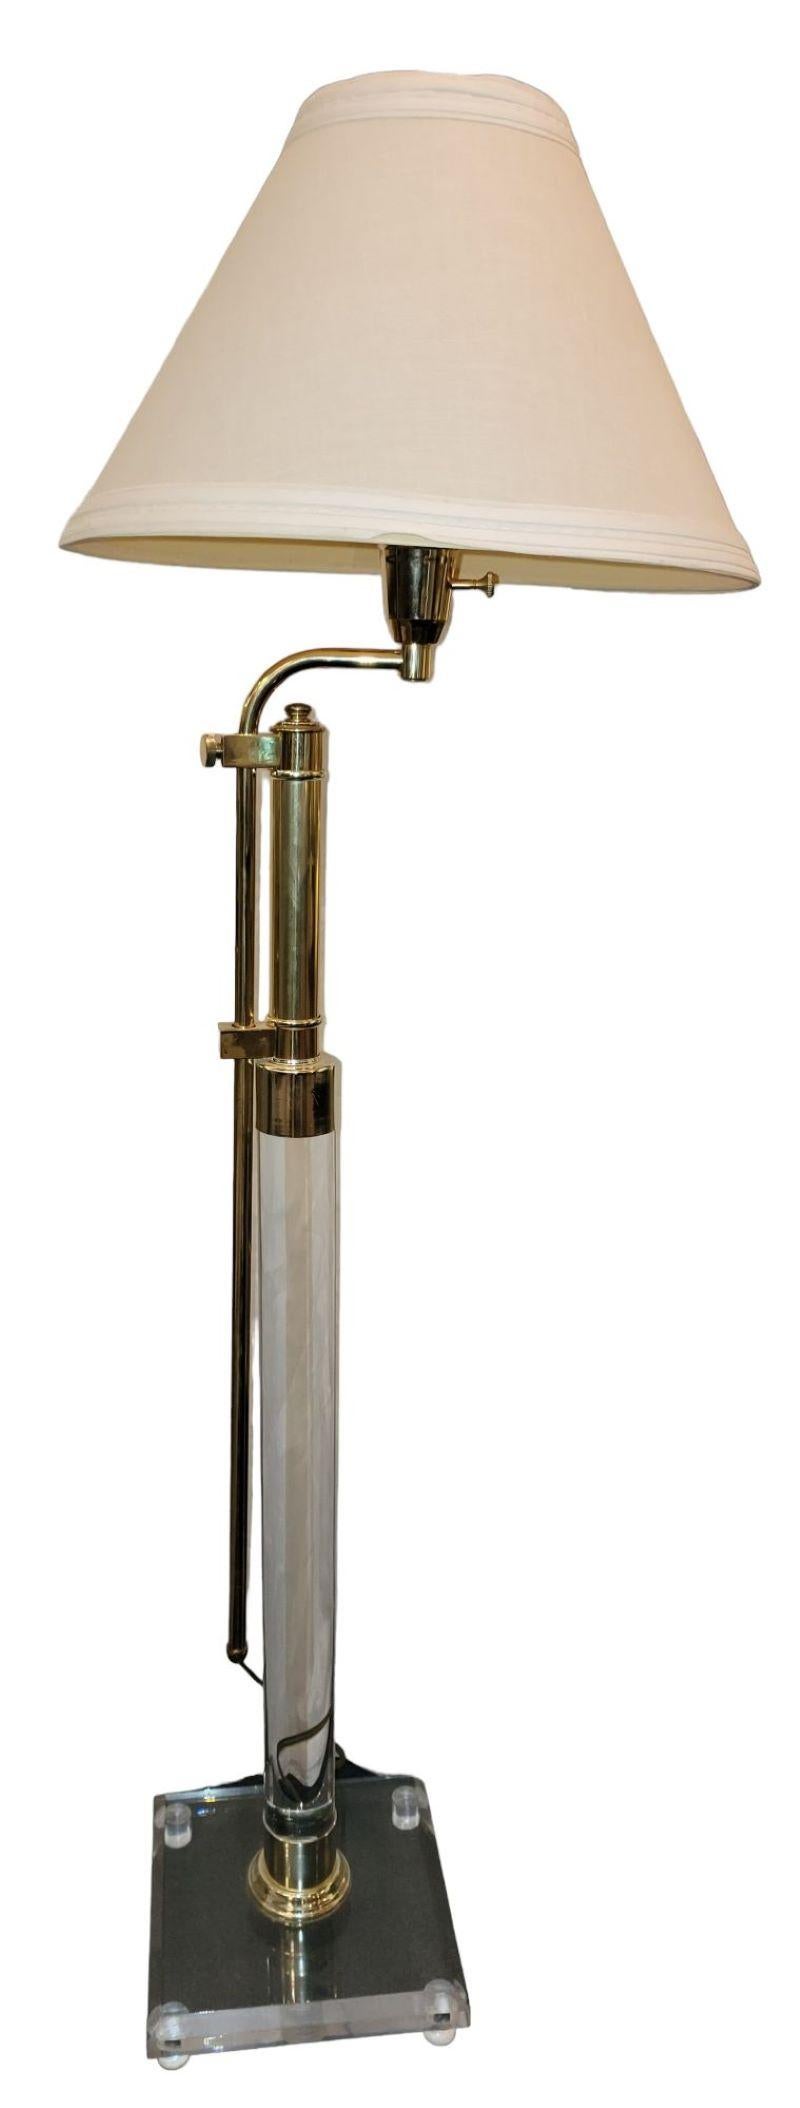 1960s Charles Hollis Jones Lucite and Brass Floor Lamp In Good Condition For Sale In Pasadena, CA